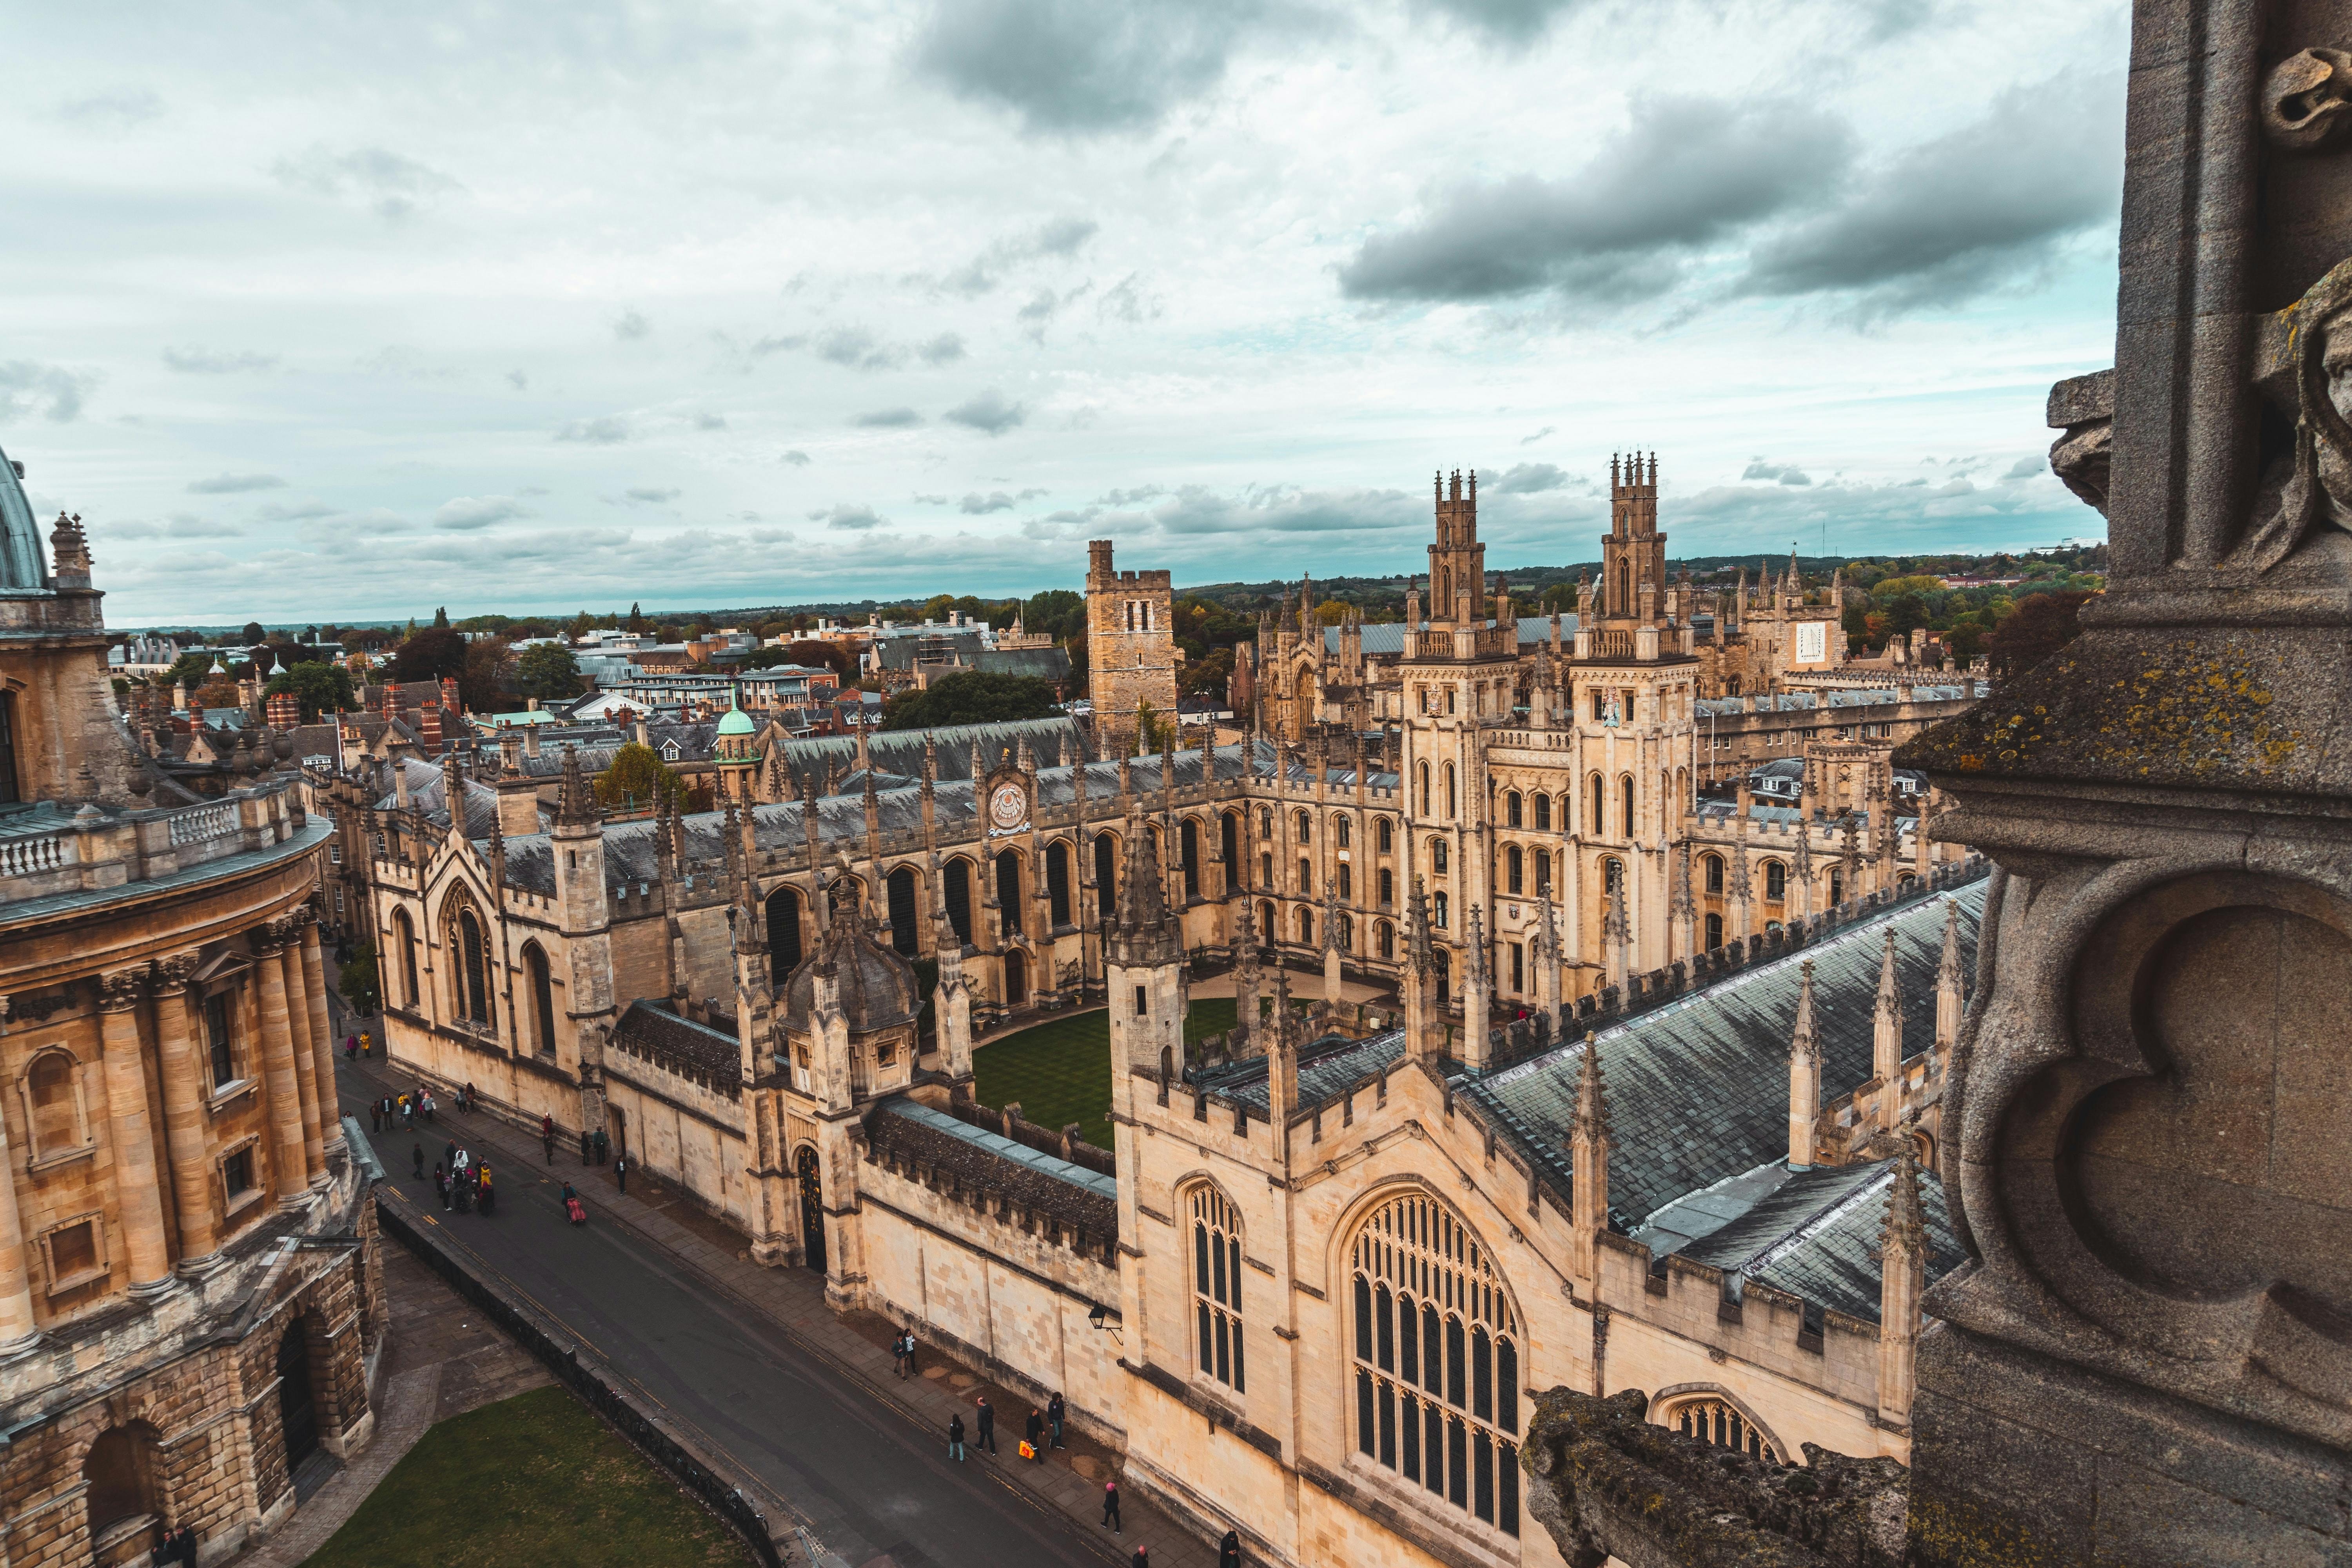 Day trip from London to Oxford